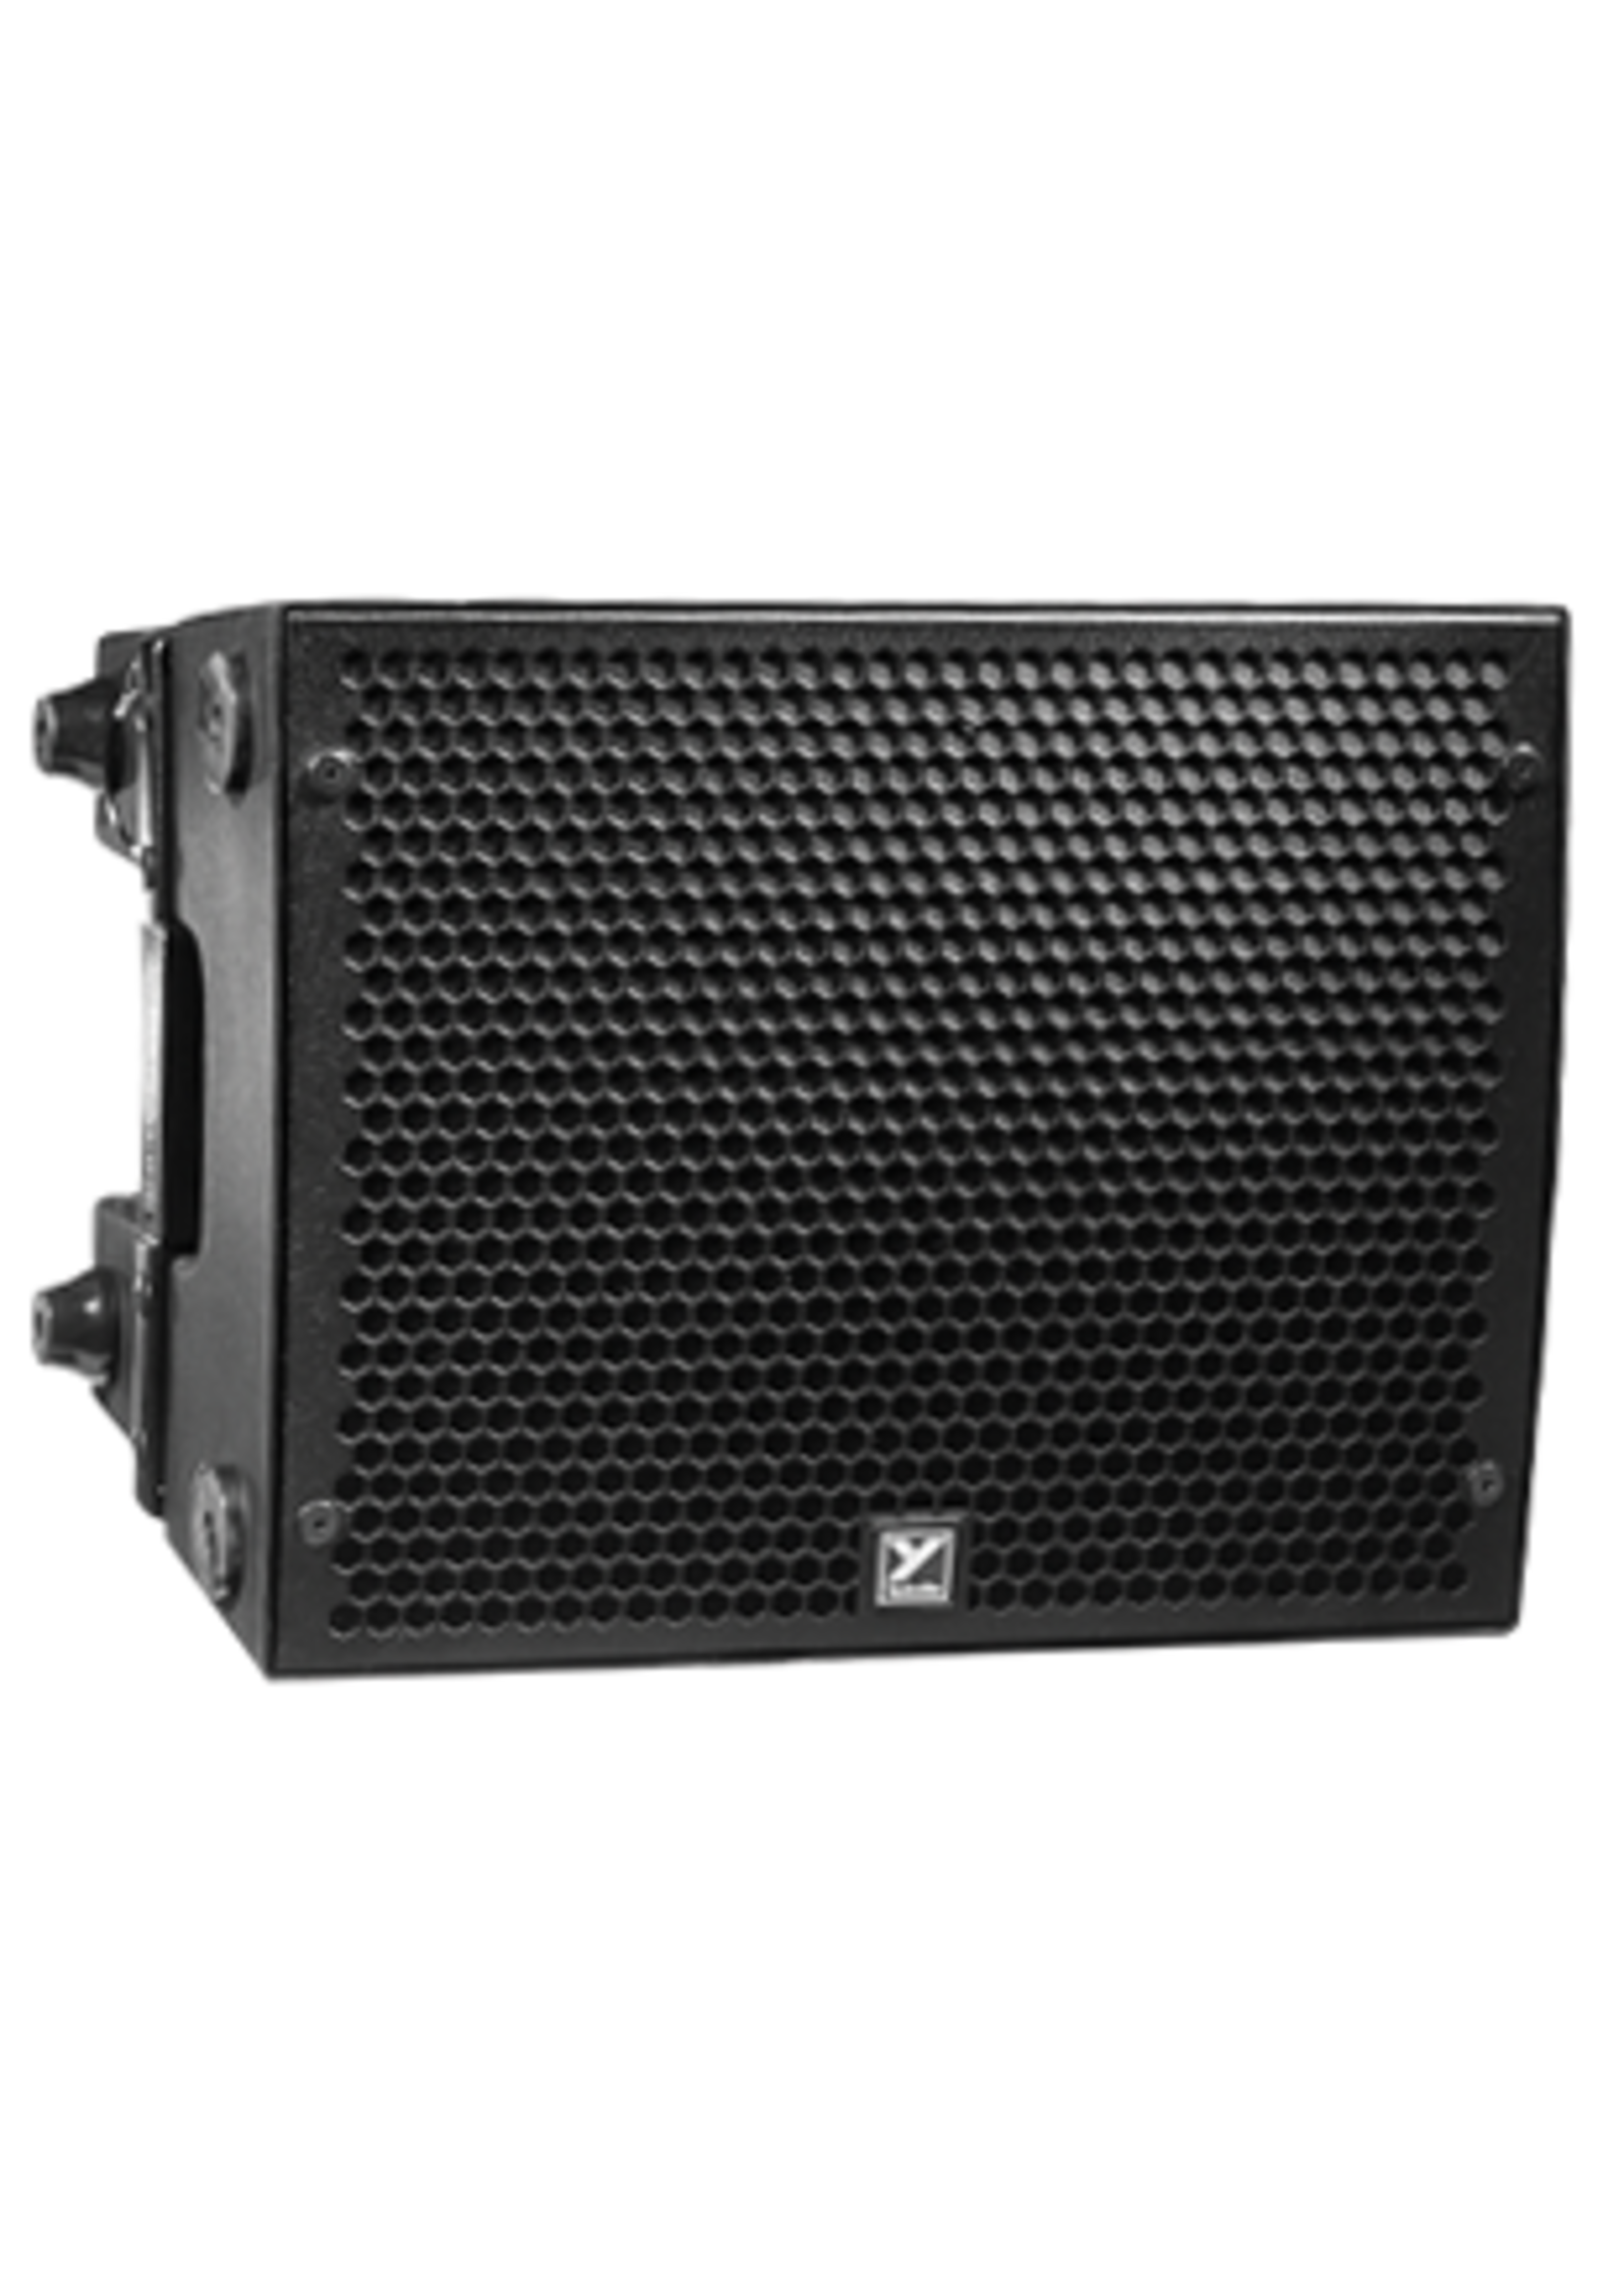 Yorkville Yorkville Sound PSA1 1200W compact array loudspeaker 4 x 6" woofers & 2 x 1" drivers on a Paraline lens.